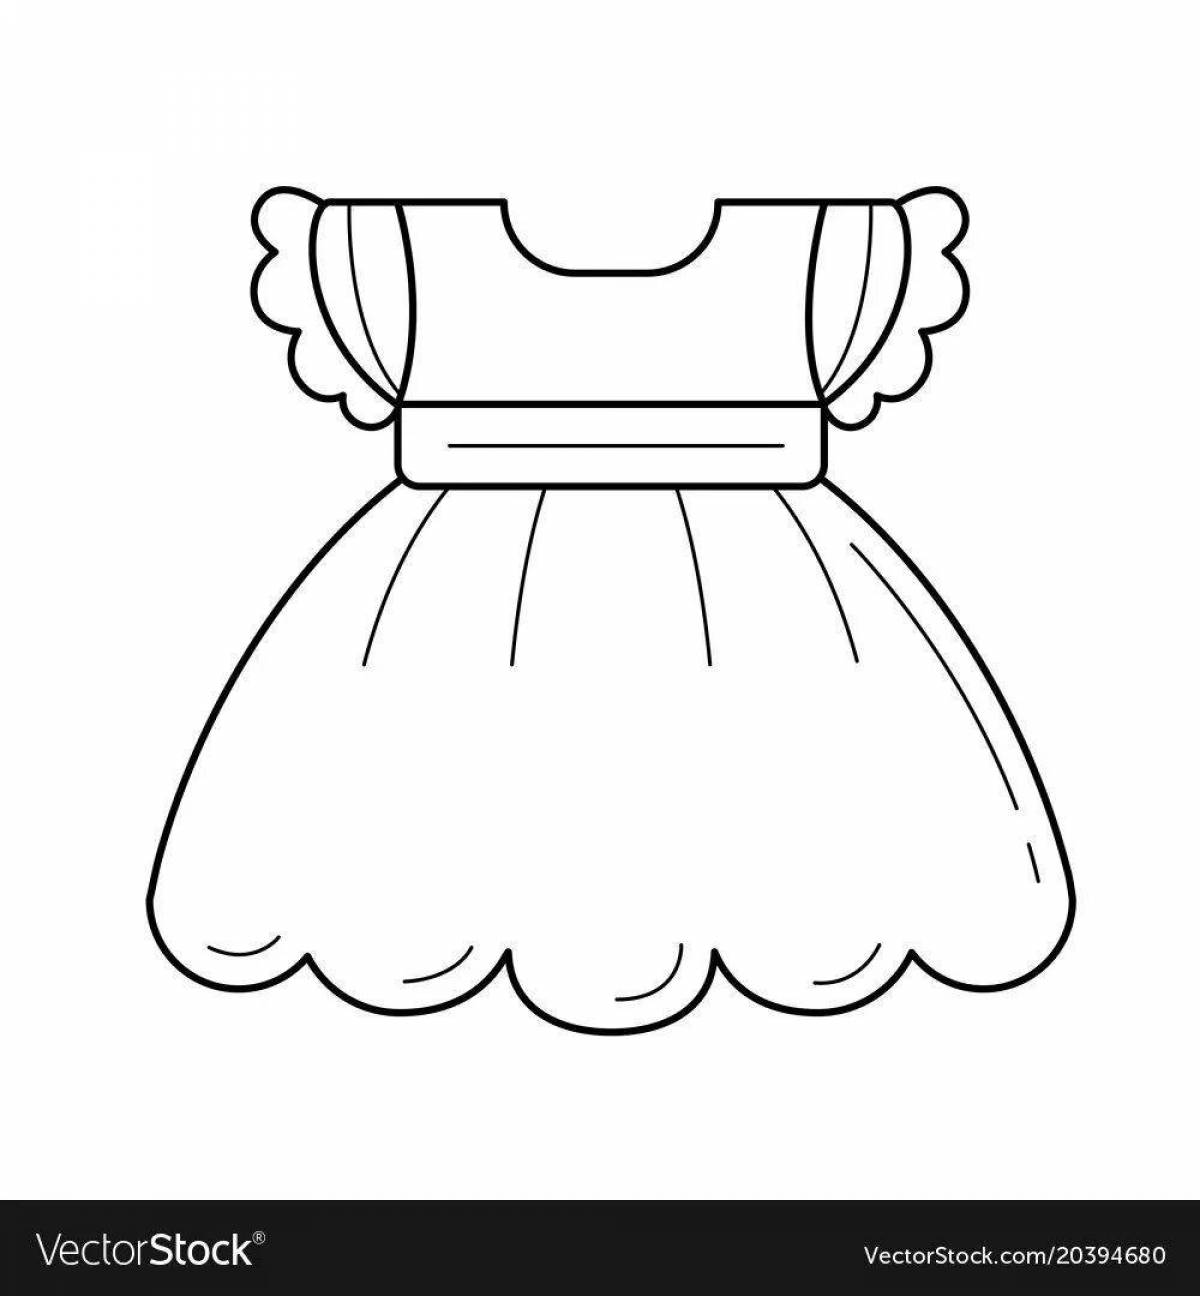 Gorgeous dress coloring page for children 2-3 years old